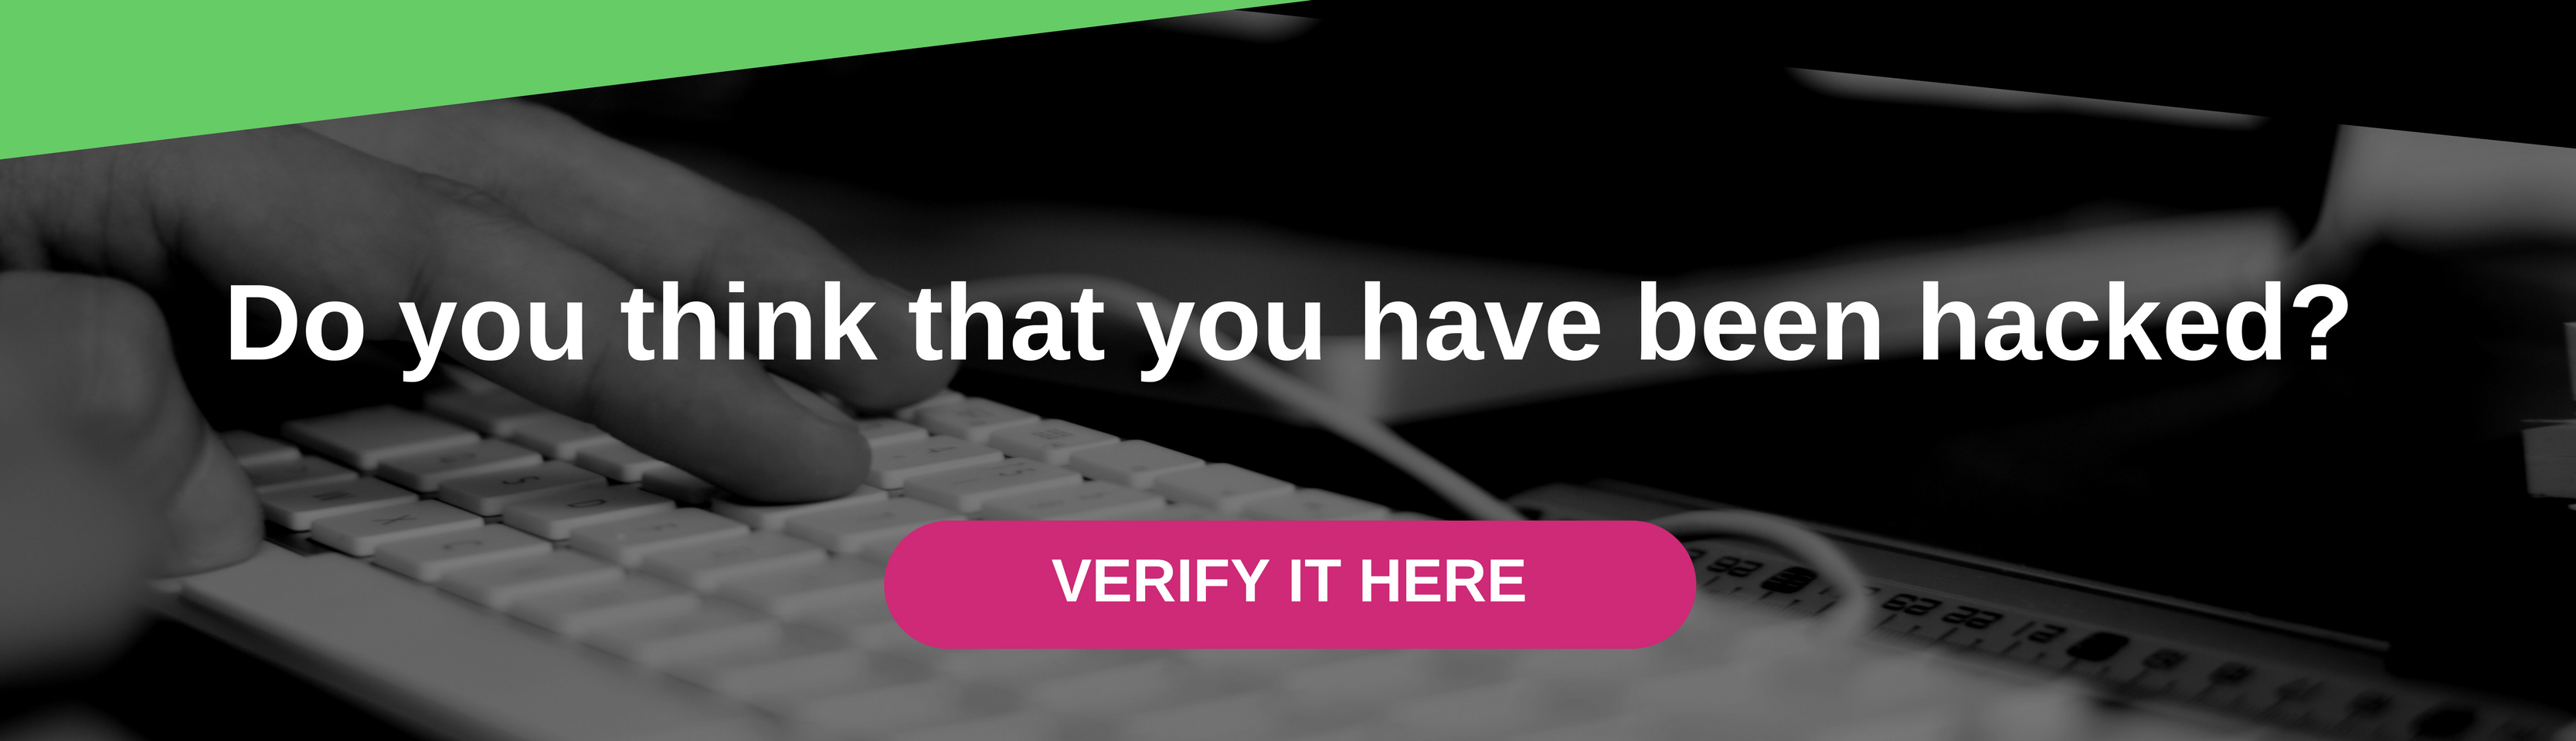 Do you think that you have been hacked? Verify it here